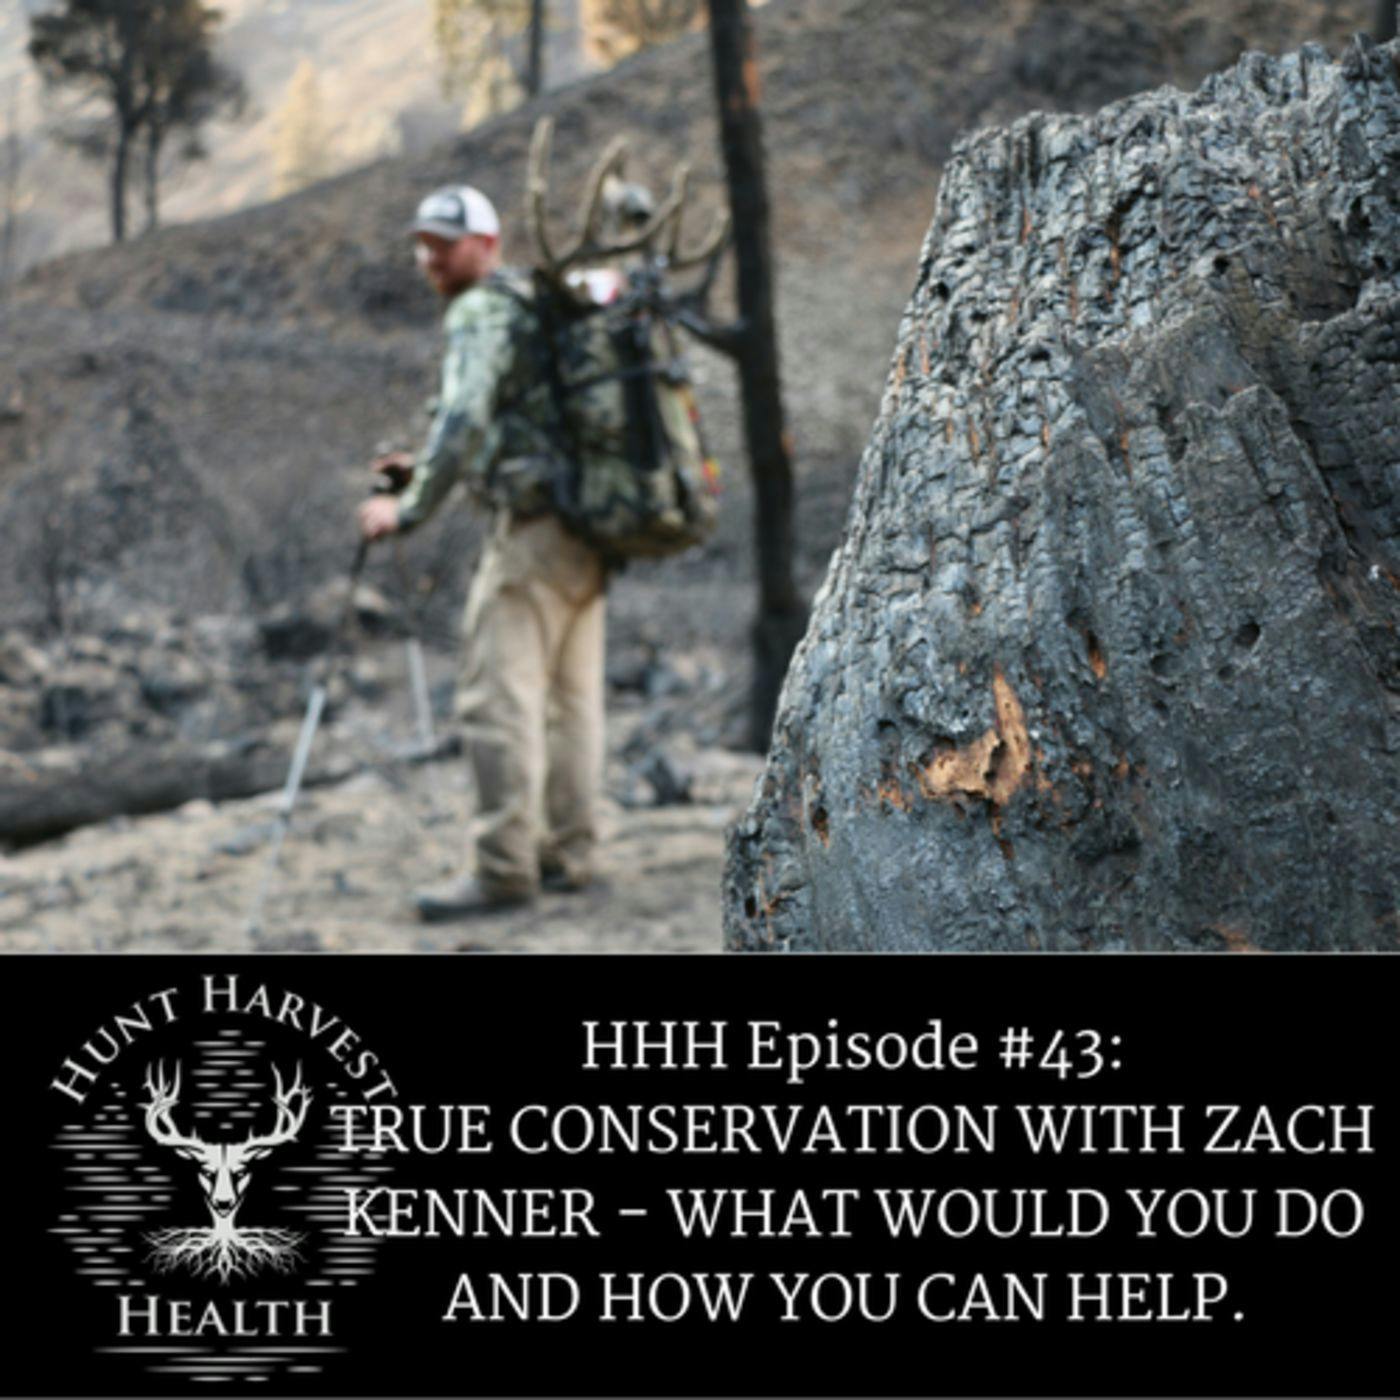 Episode #44: TRUE CONSERVATION WITH ZACH KENNER - WHAT WOULD YOU DO AND HOW YOU CAN HELP.